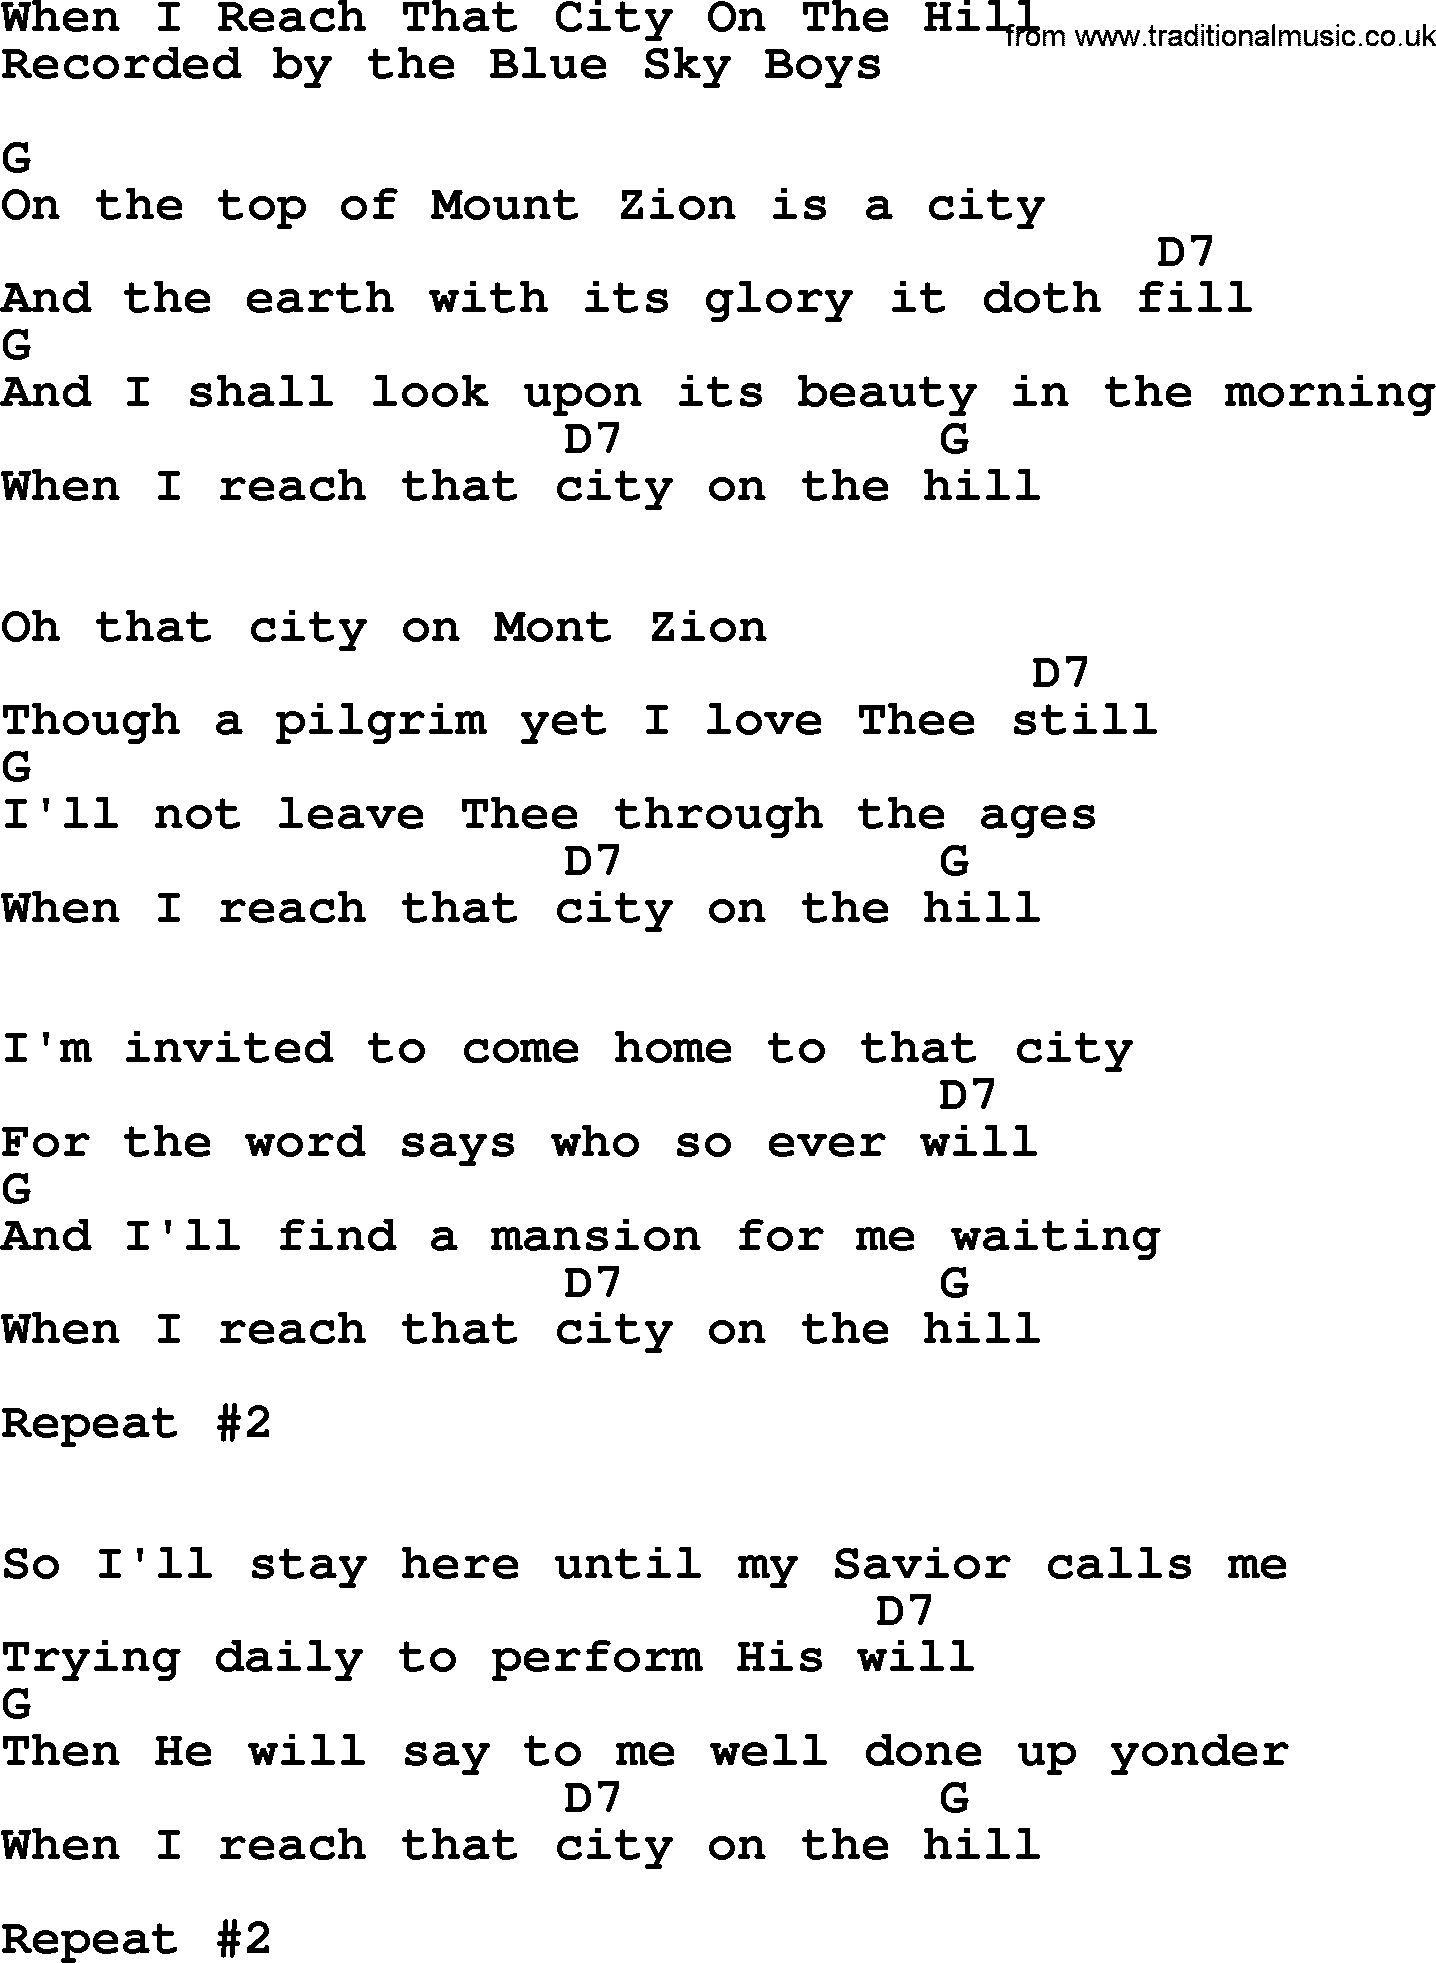 Bluegrass song: When I Reach That City On The Hill, lyrics and chords